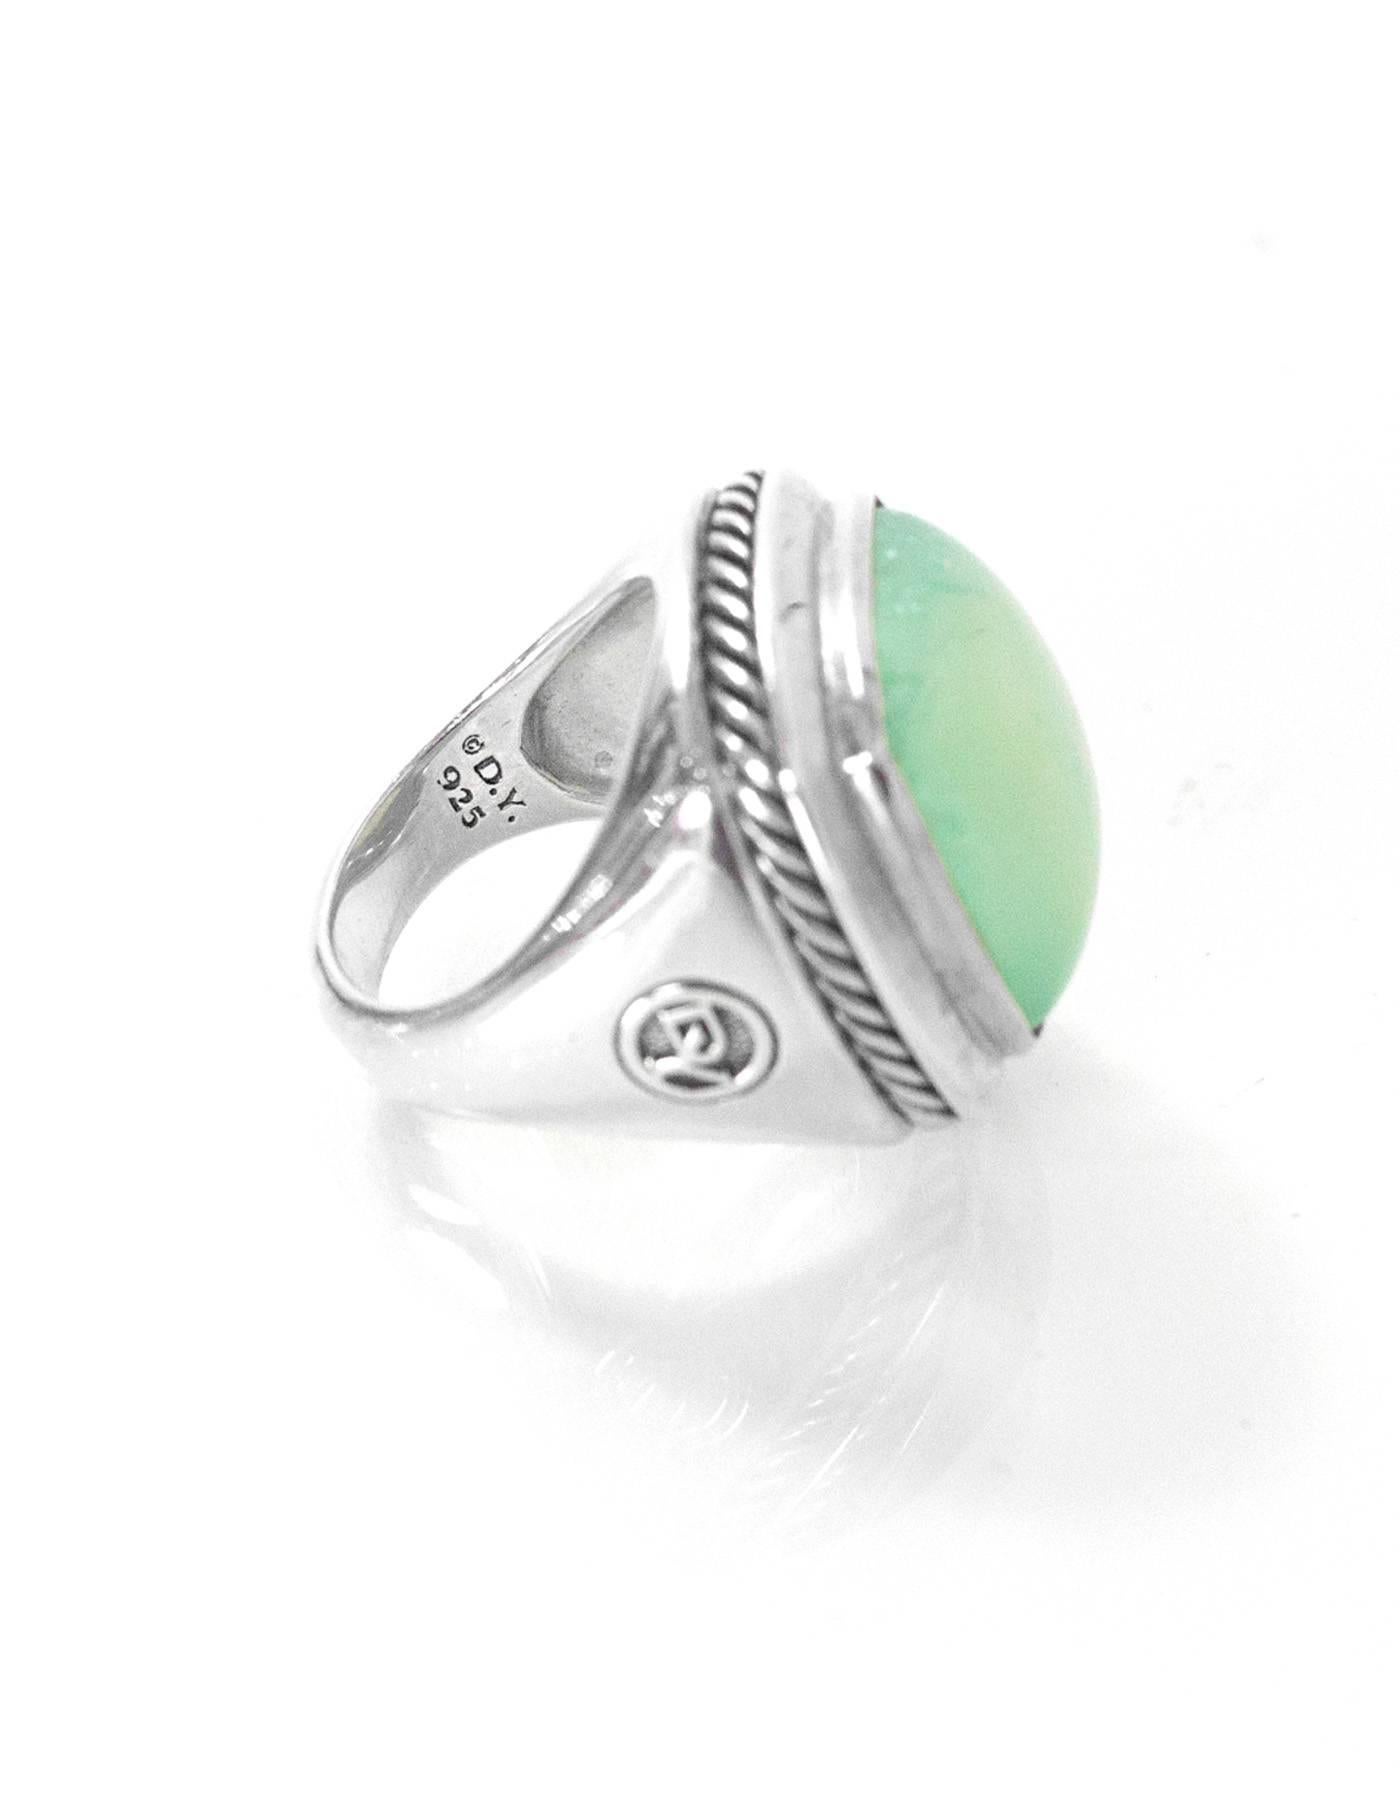 David Yurman Aqua Chalcedony & Sterling Albion Ring

Color: Teal and silver
Materials: Sterling and precious stone
Closure: None
Stamp: D.Y. 925
Retail Price: $850 + tax
Overall Condition: Excellent pre-owned condition with the exception of some